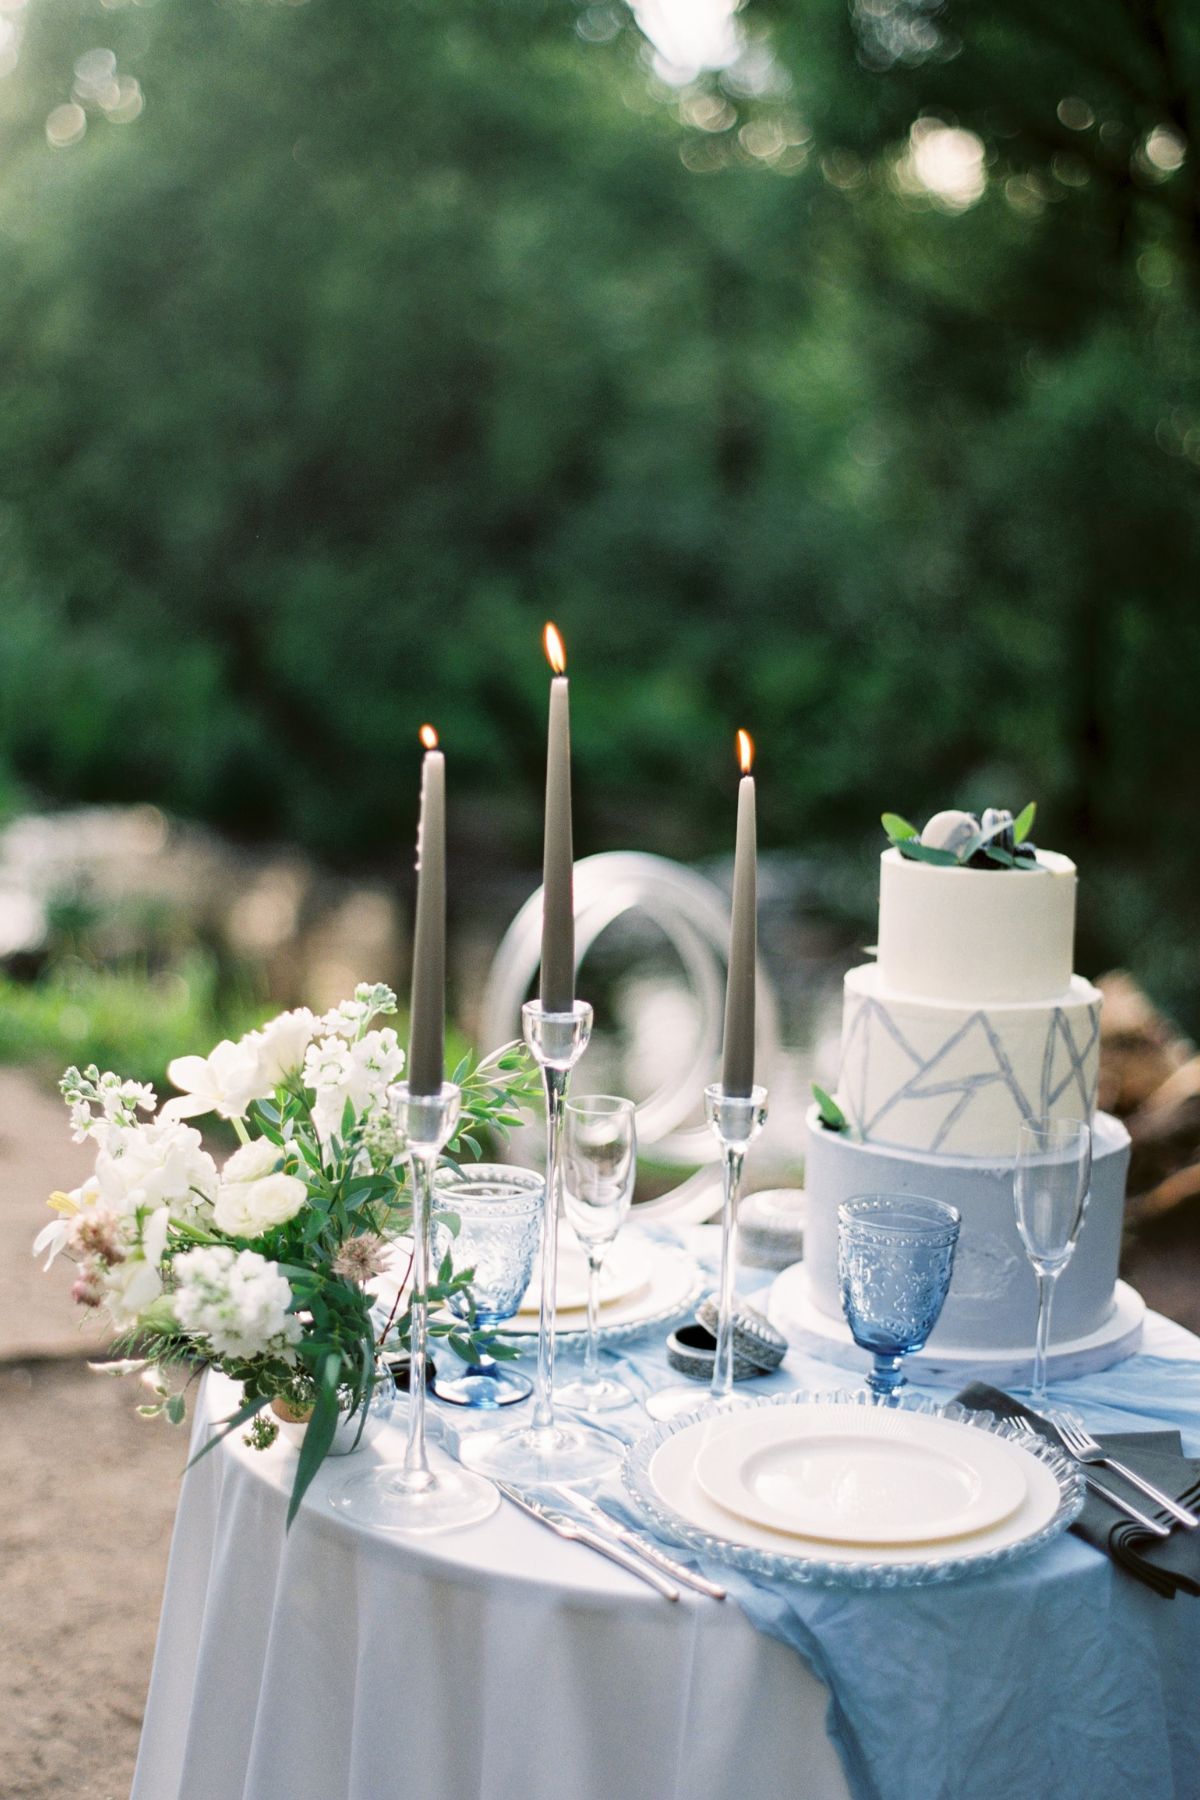 How to Plan an At-Home Wedding